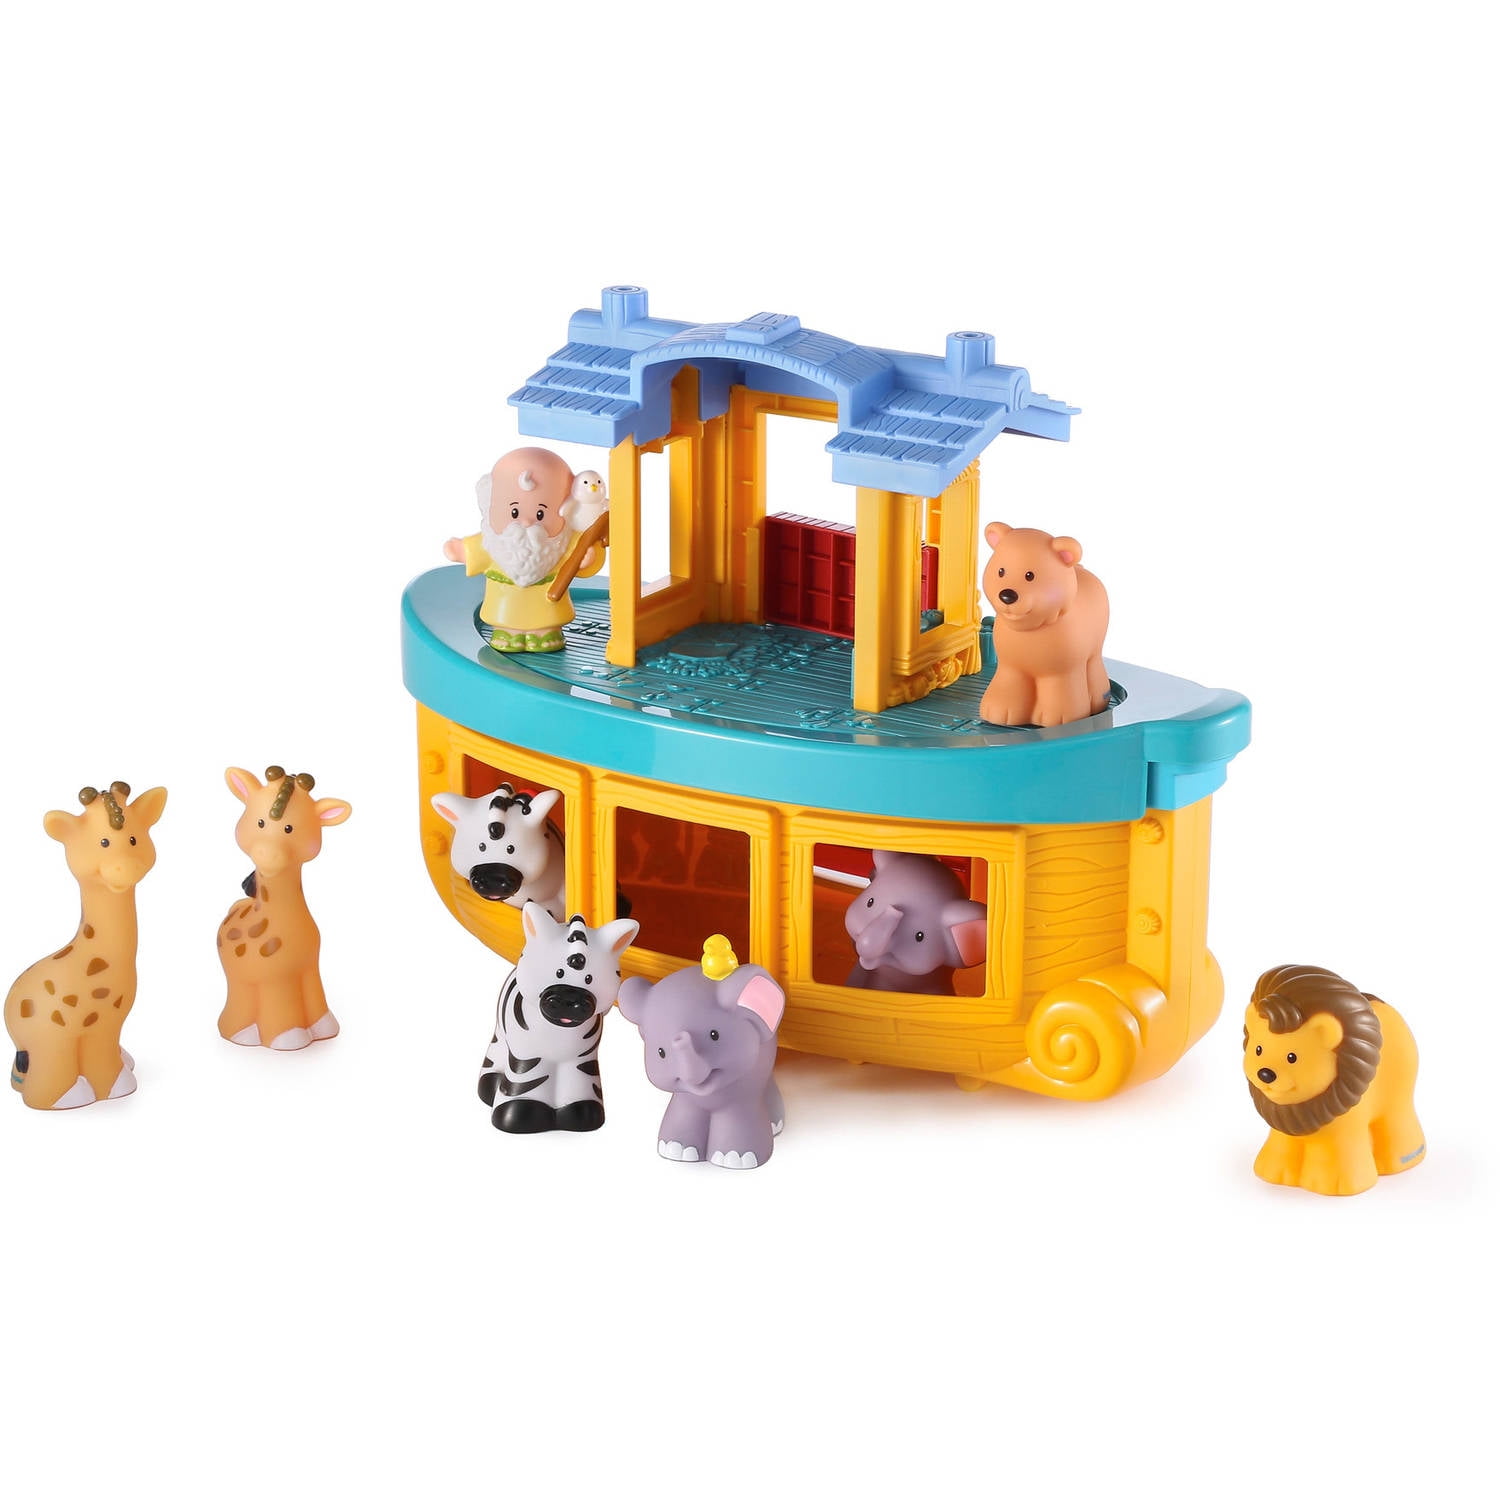  Fisher-Price Little People Toddler Toy Nativity Set with Music  Lights and 18 Pieces for Christmas Play Ages 1+ years : Toys & Games